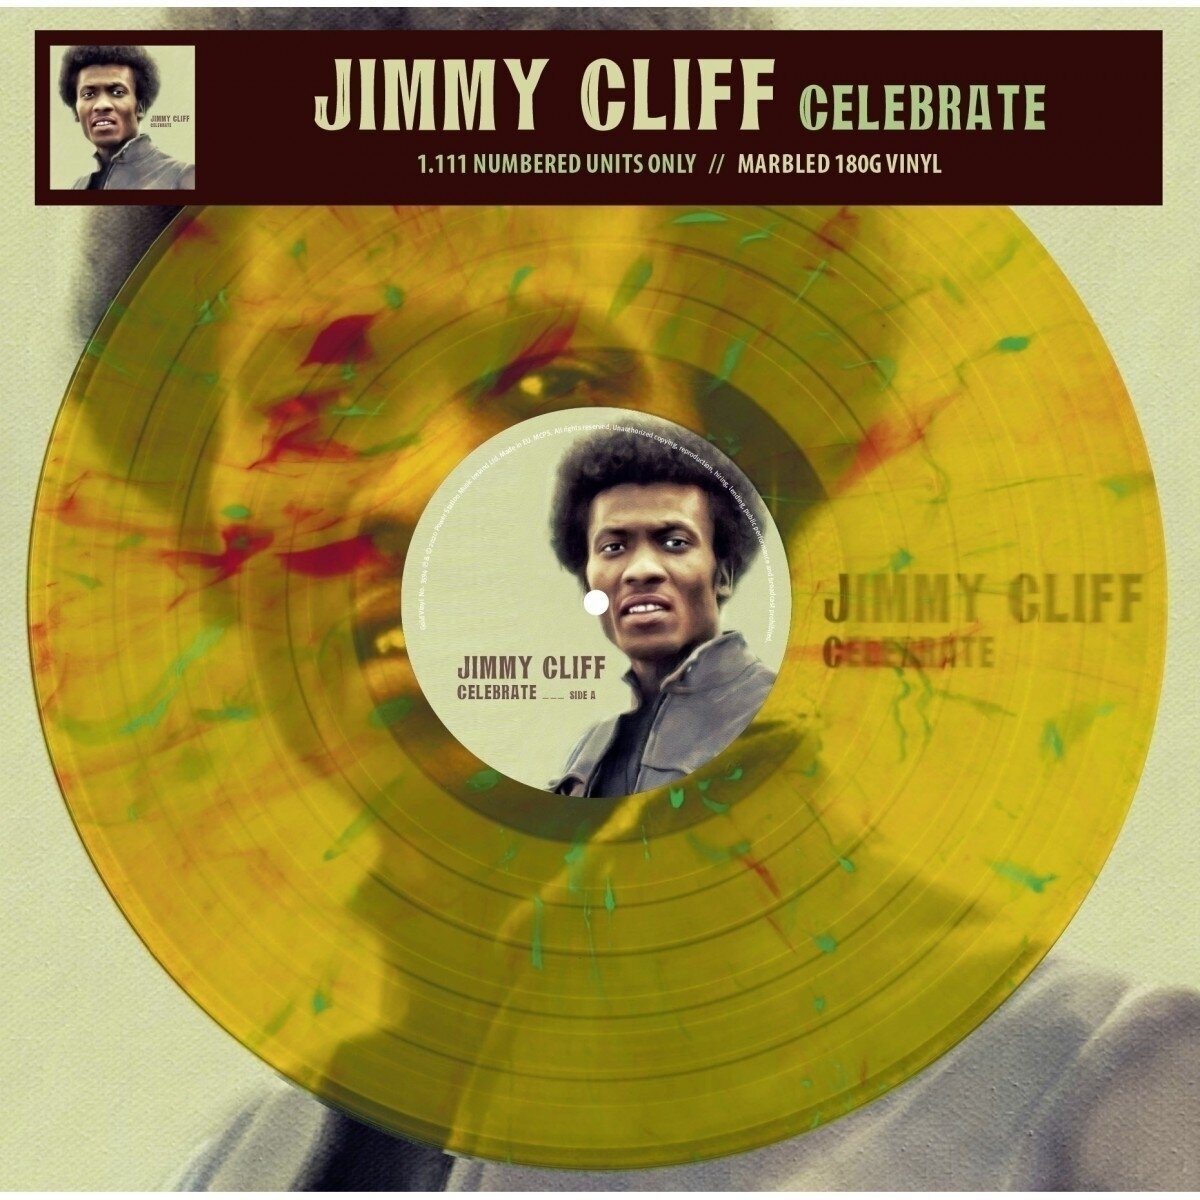 Vinyl Record Jimmy Cliff - Celebrate (Limited Edition) (Numbered) (Marbled Coloured) (LP)